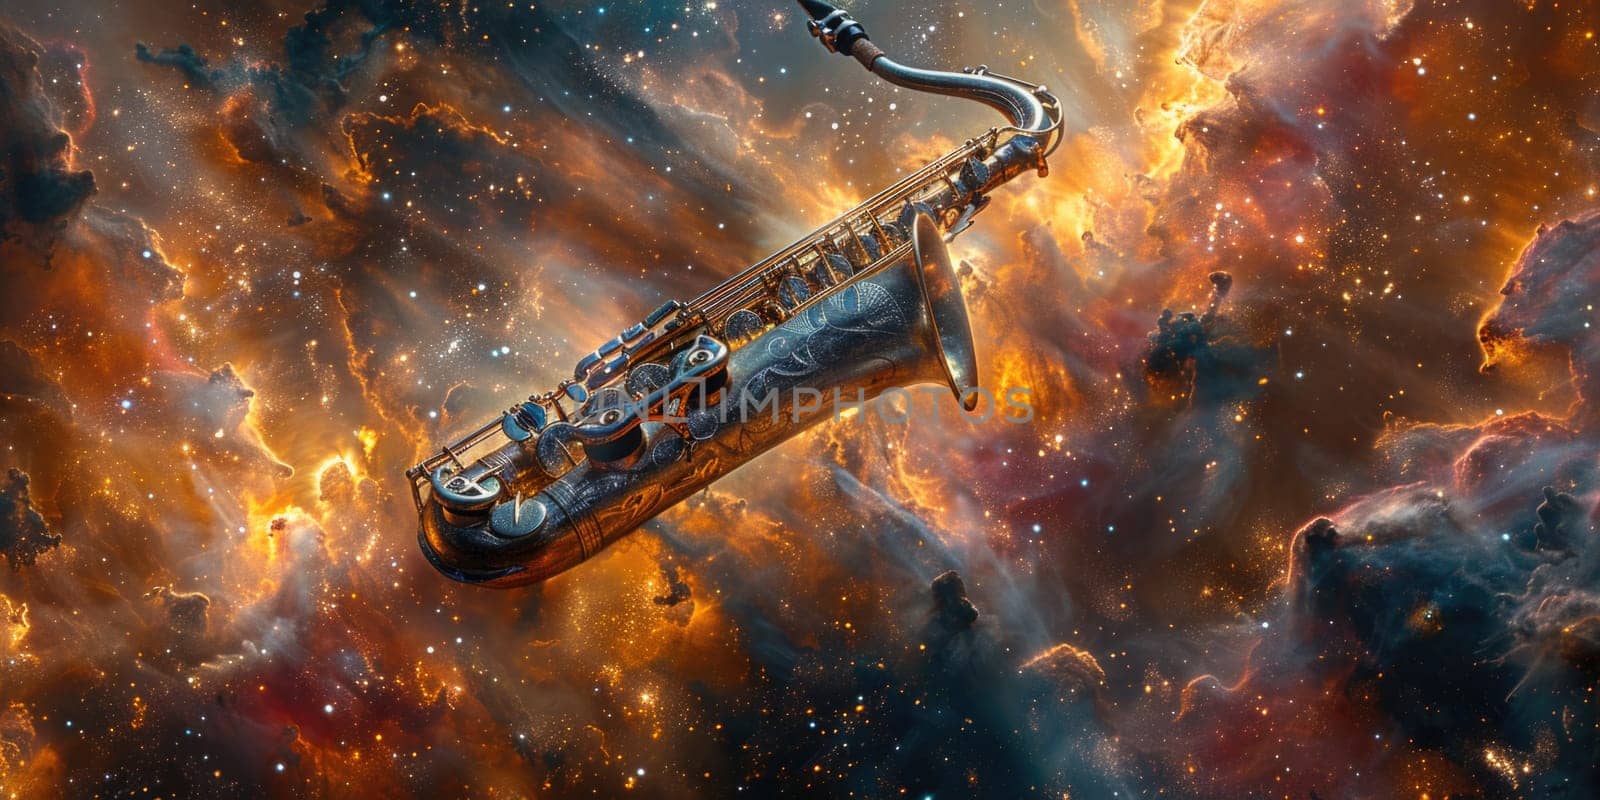 A saxophone placed in the midst of a space filled with stars, creating a unique celestial music scene.